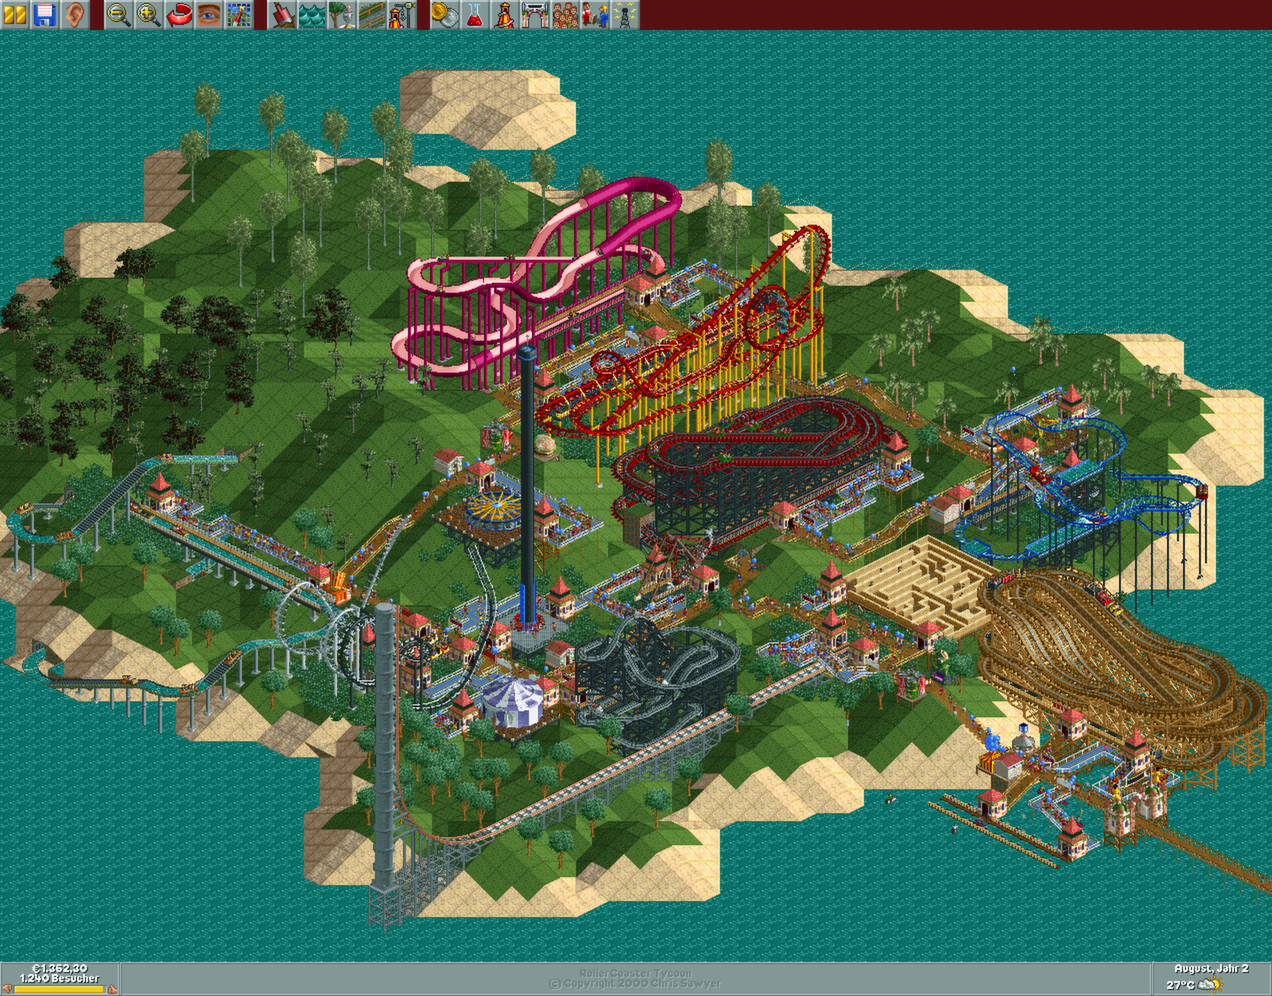 Play RollerCoaster Tycoon on PC 